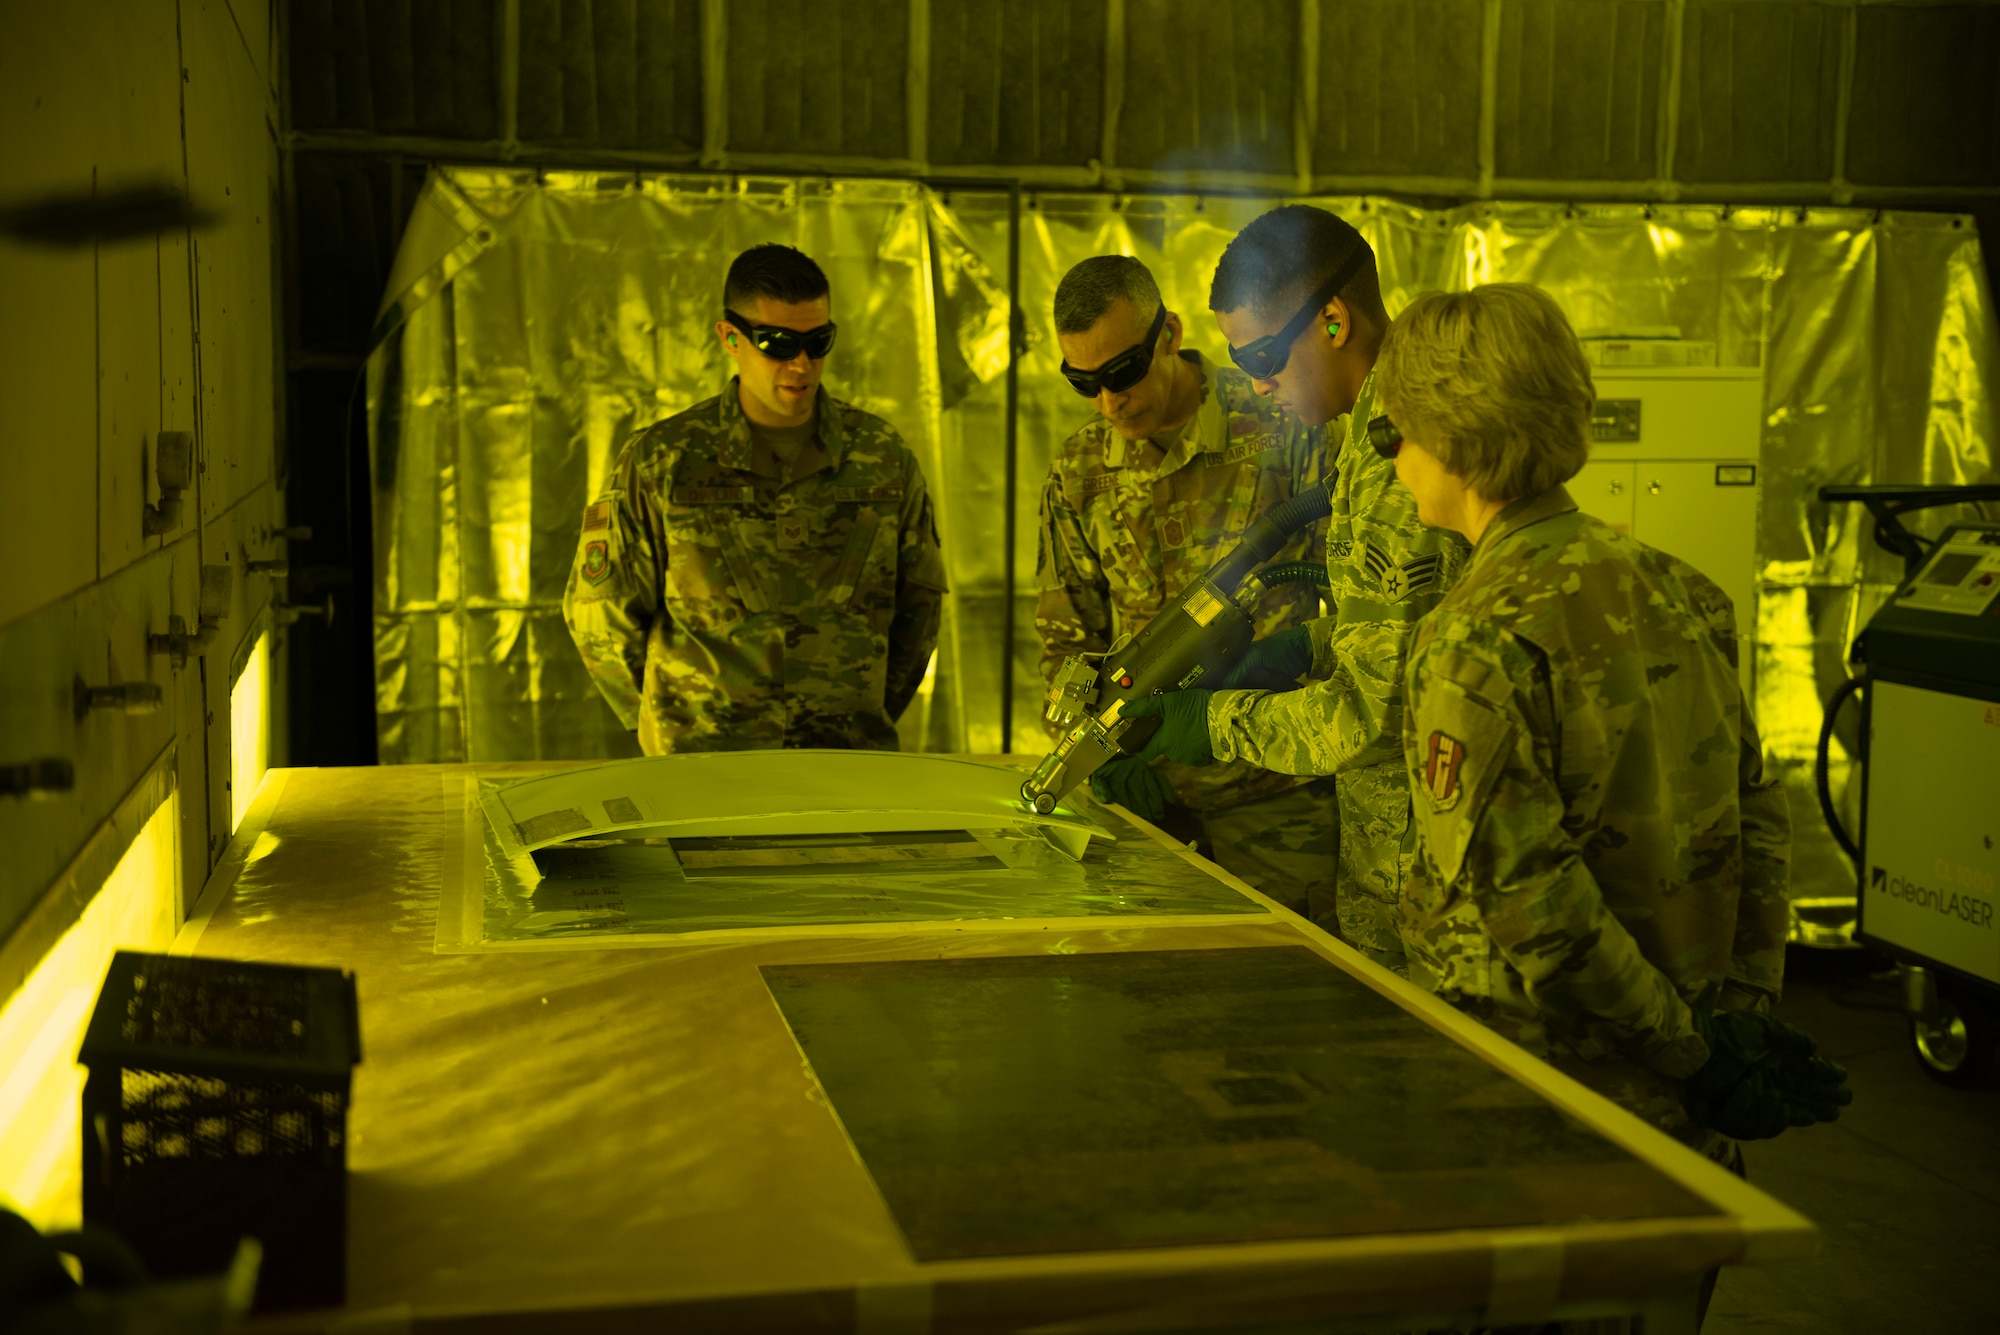 U.S. Air Force Gen. Maryanne Miller, Air Mobility Command commander and Chief Master Sgt. Terrence Greene, AMC command chief, watch a laser demonstration by Senior Airman Levi Gordon, 60th Maintenance Squadron aircraft structural maintenance apprentice, during a base tour at Travis Air Force Base, Calif., April 17, 2019. During their four-day visit, Miller and Greene met with Airmen across Travis to see how the base enhances AMC’s global mobility capabilities. (U.S. Air Force photo by Tech. Sgt. James Hodgman)